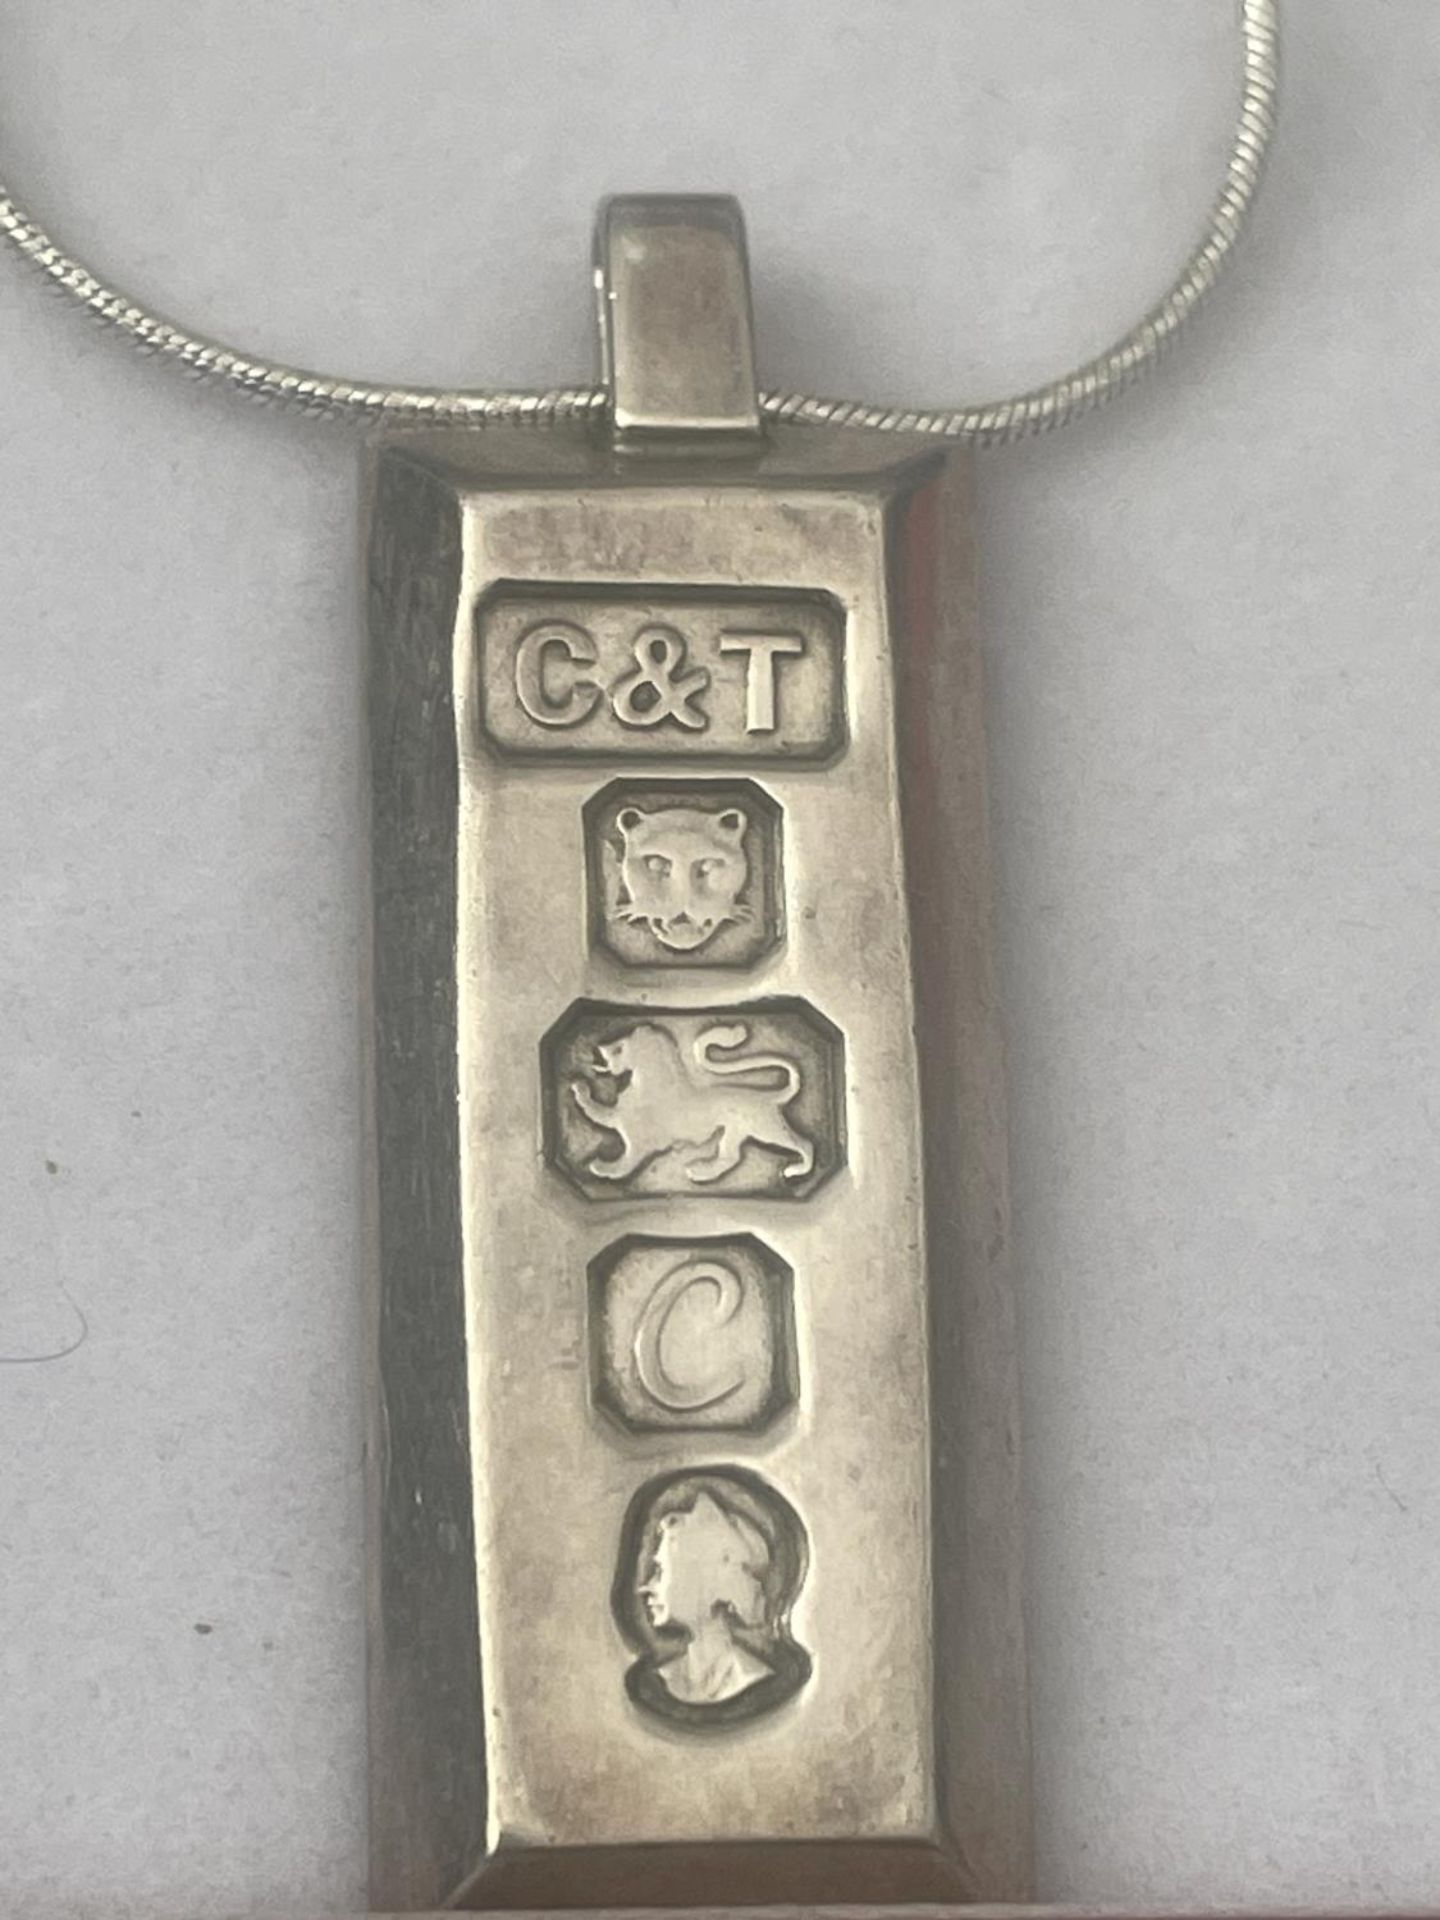 A SILVER INGOT IN A PRESENTATION BOX - Image 2 of 2